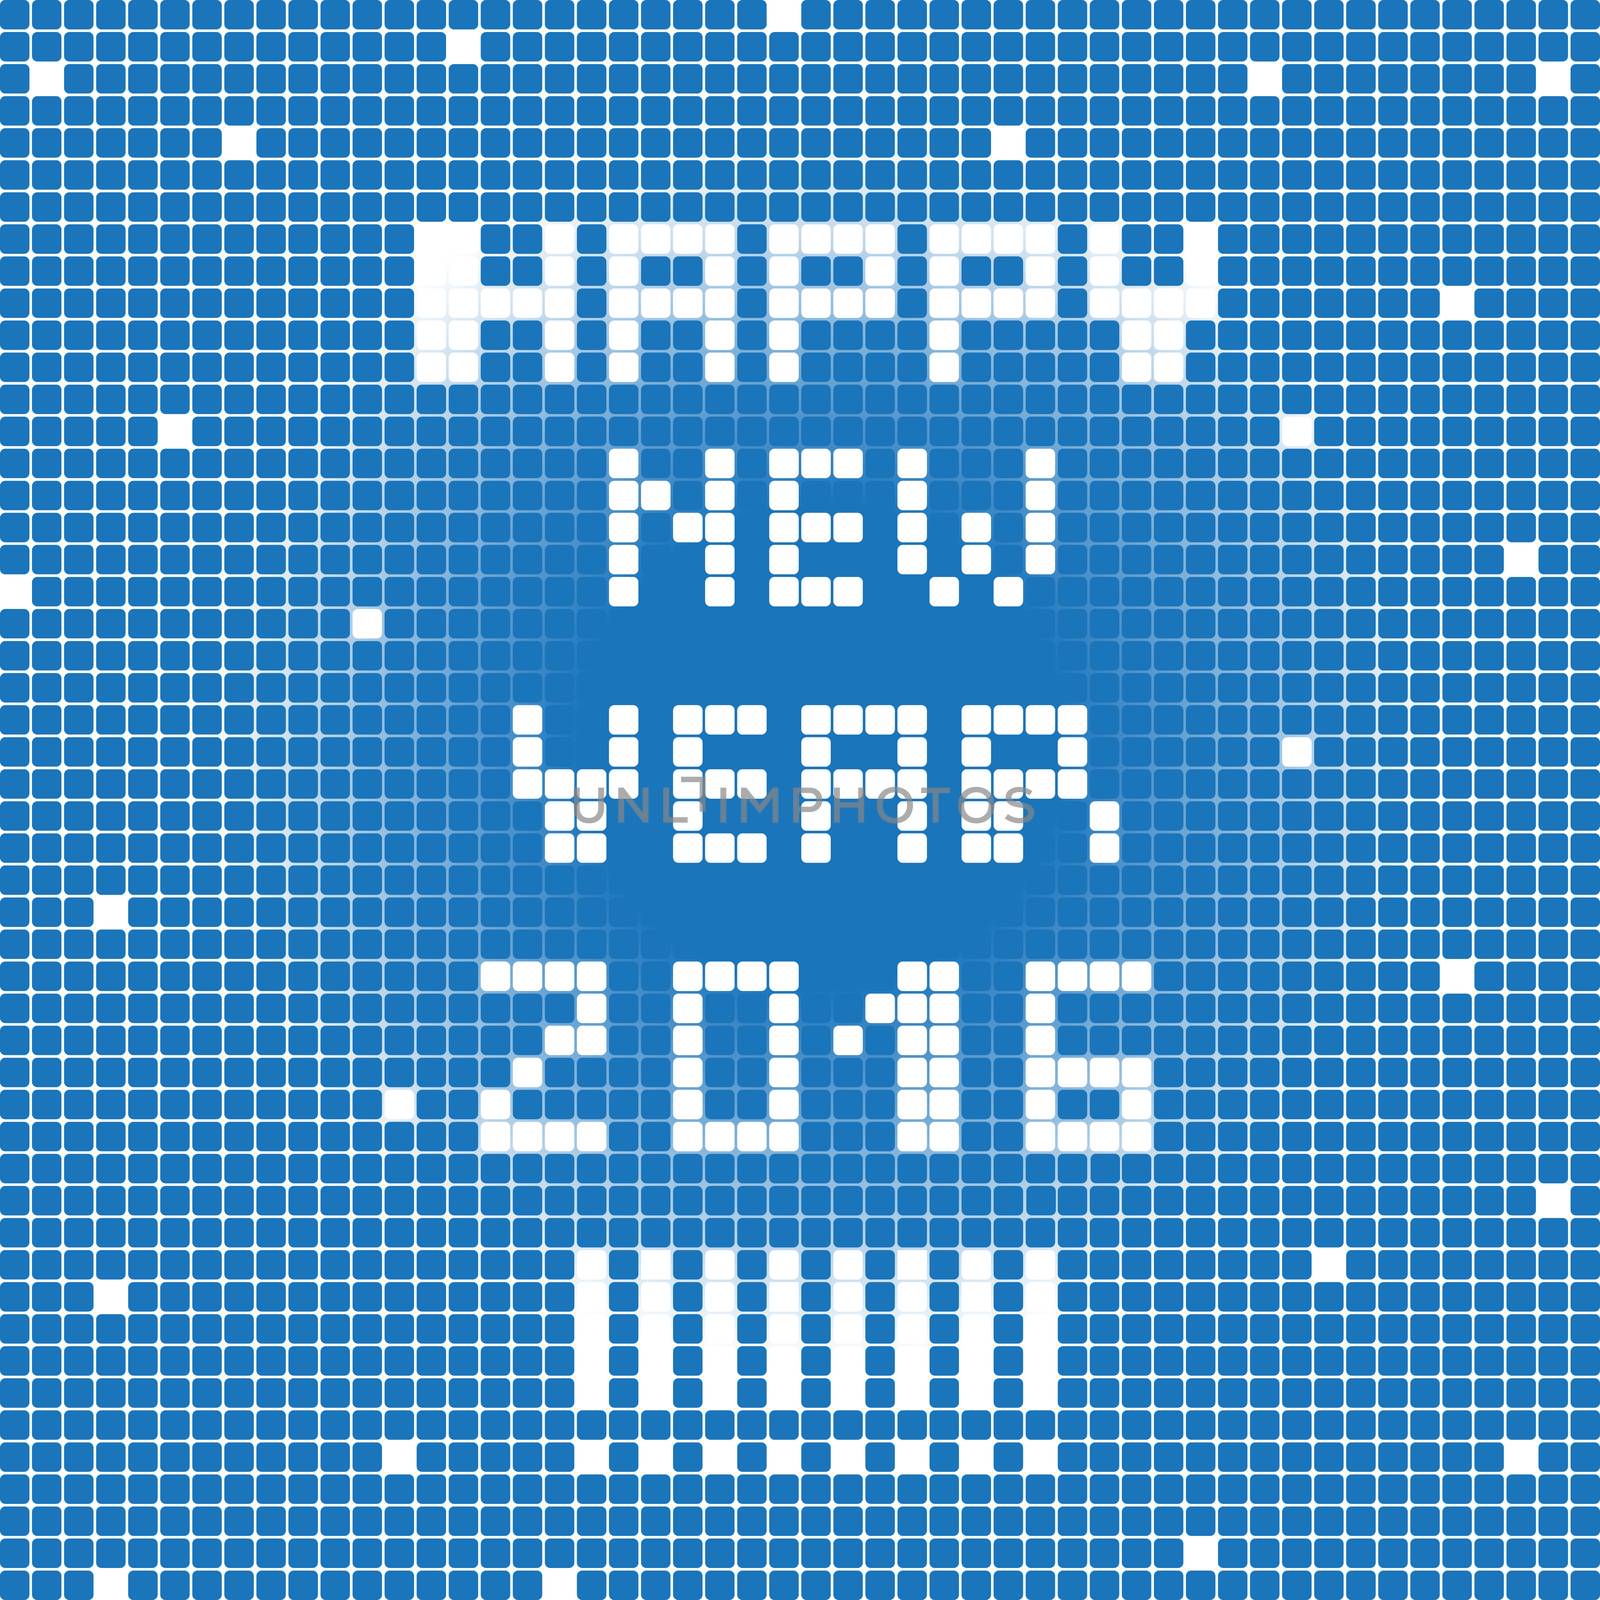 Happy New Year 2016 greetings card, pixel illustration of a scoreboard composition with digital text